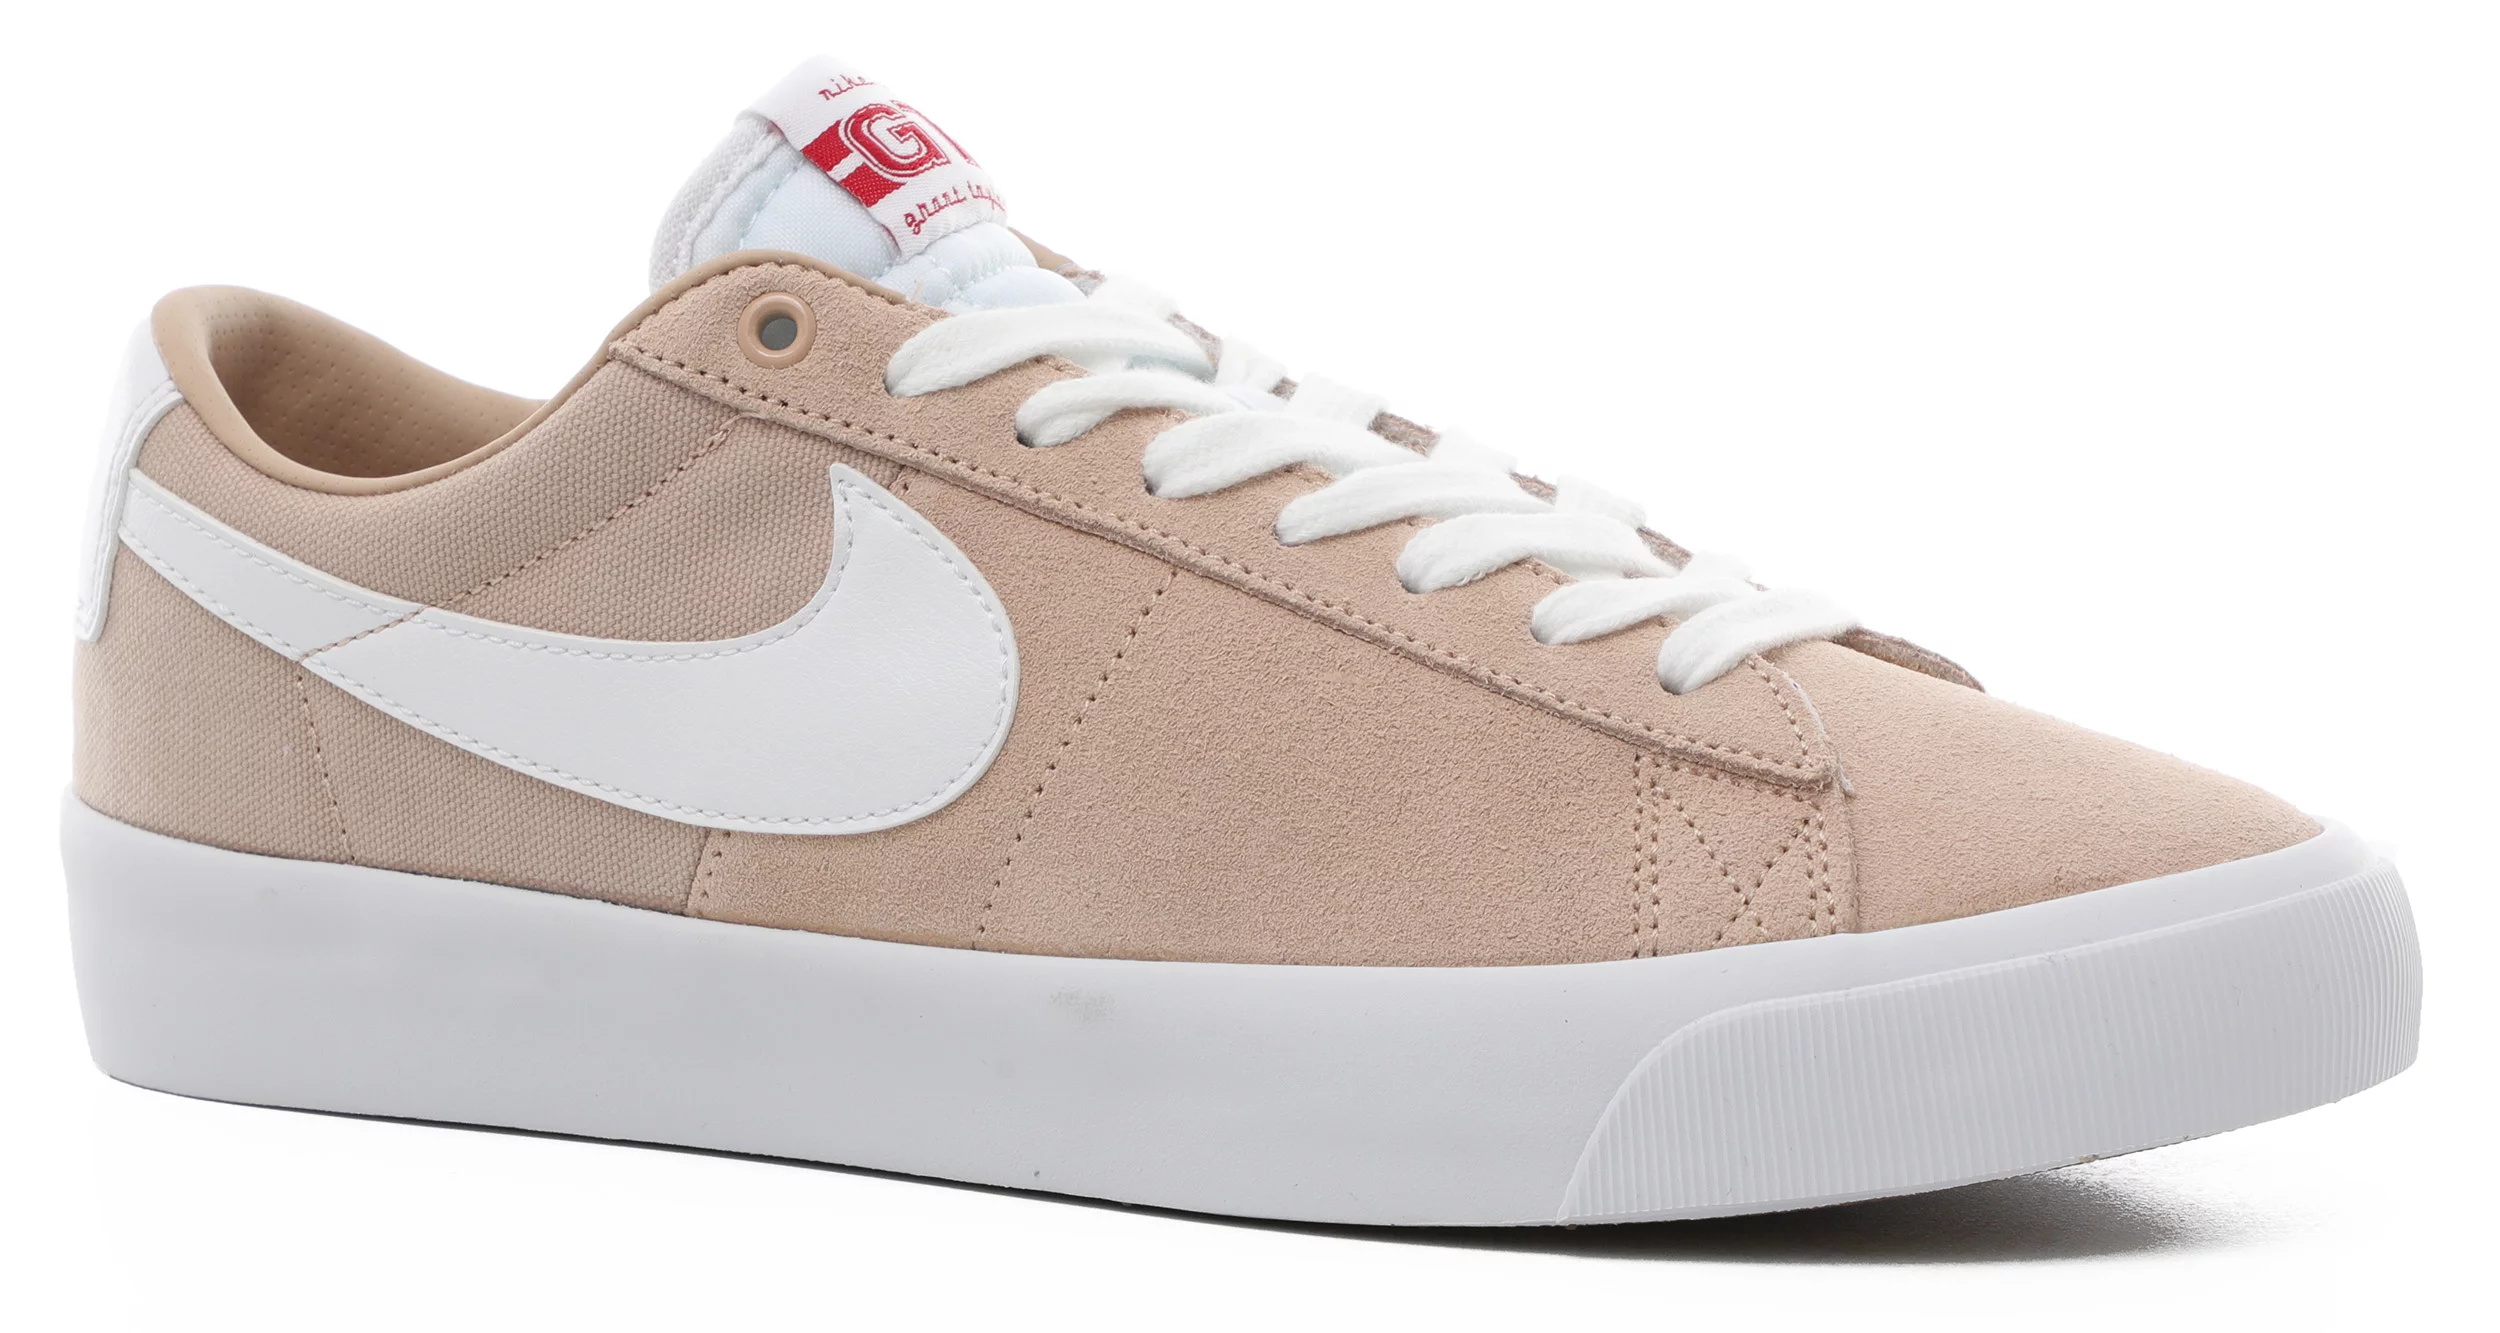 nike sb blazer low gt white and red